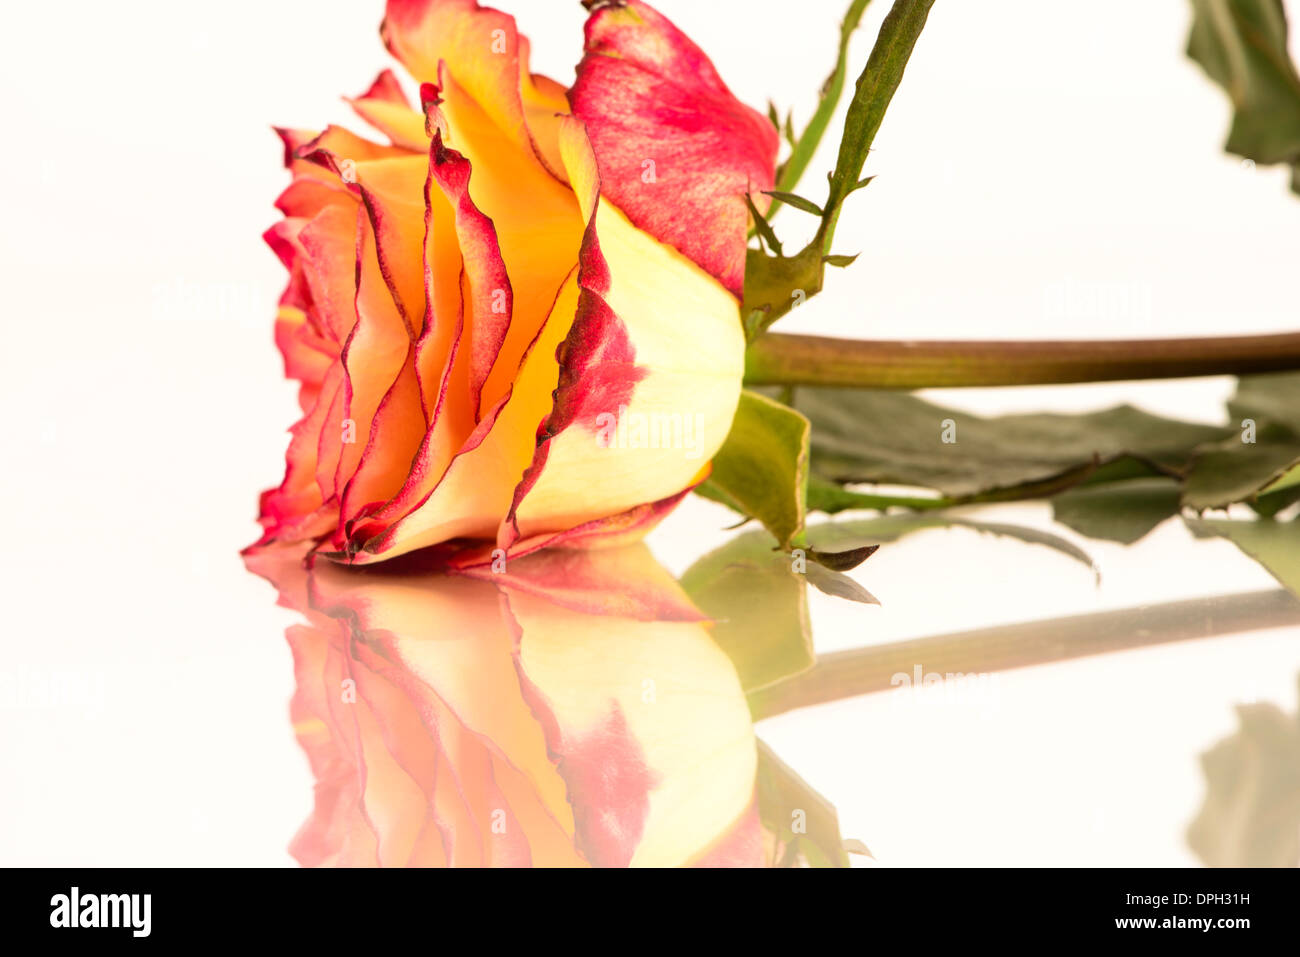 Yellow and red rose on white background, side view with reflections on glass Stock Photo